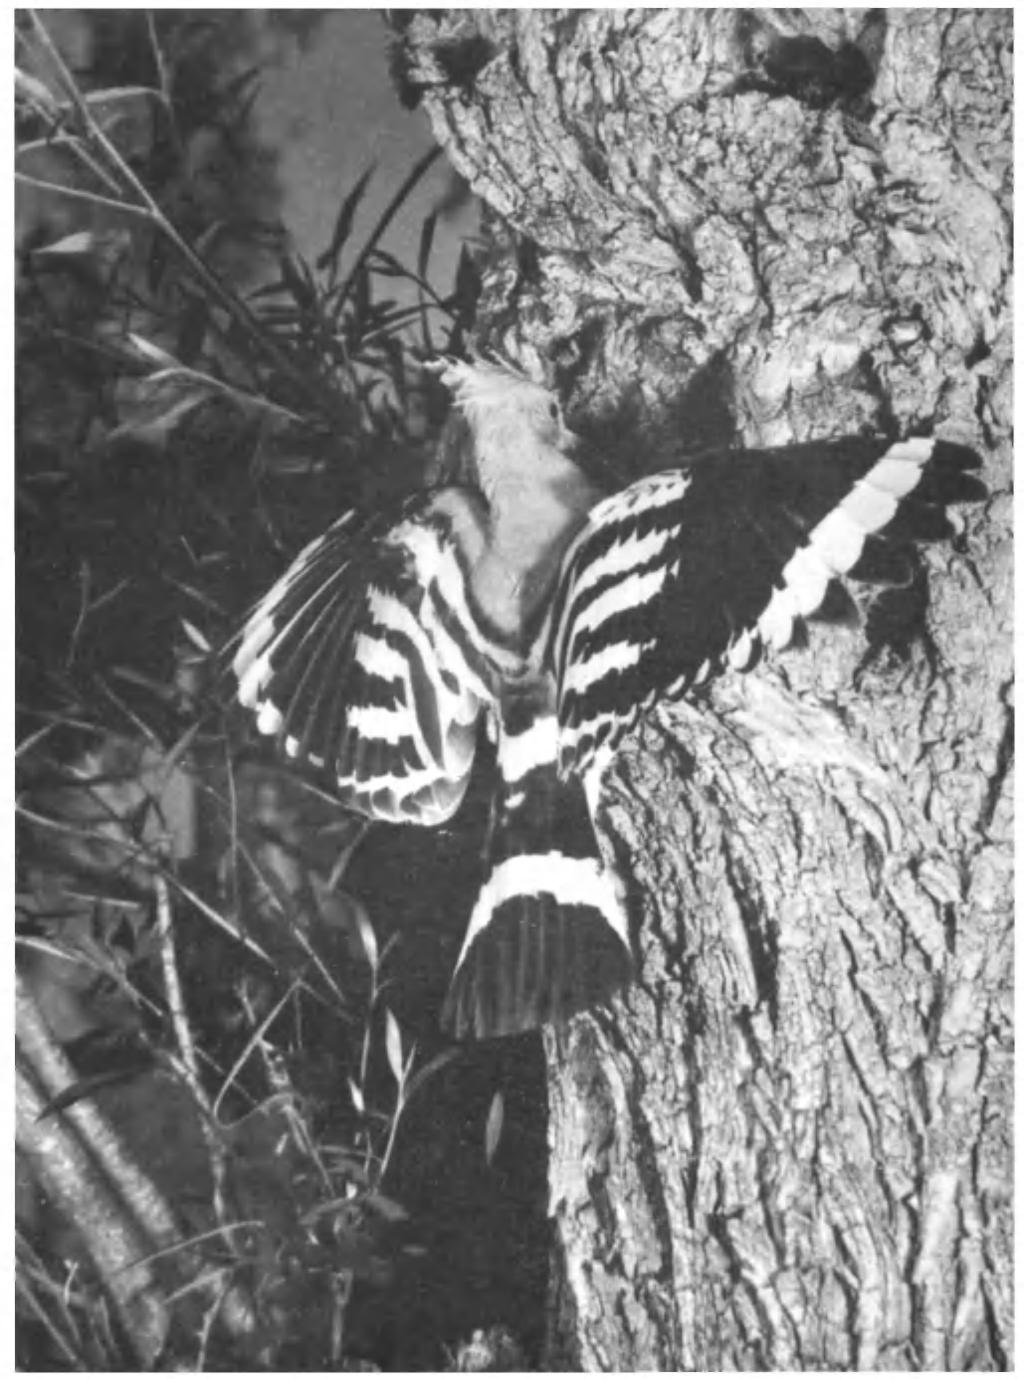 PLATE 48 C C. Doncaster ADULT HOOPOE (Upupa epops) AT NEST-HOLE CAMARGUE, SOUTH FRANCE, MAY 1953 The breadth and rounded shape of the distinctively barred wings can be seen here.